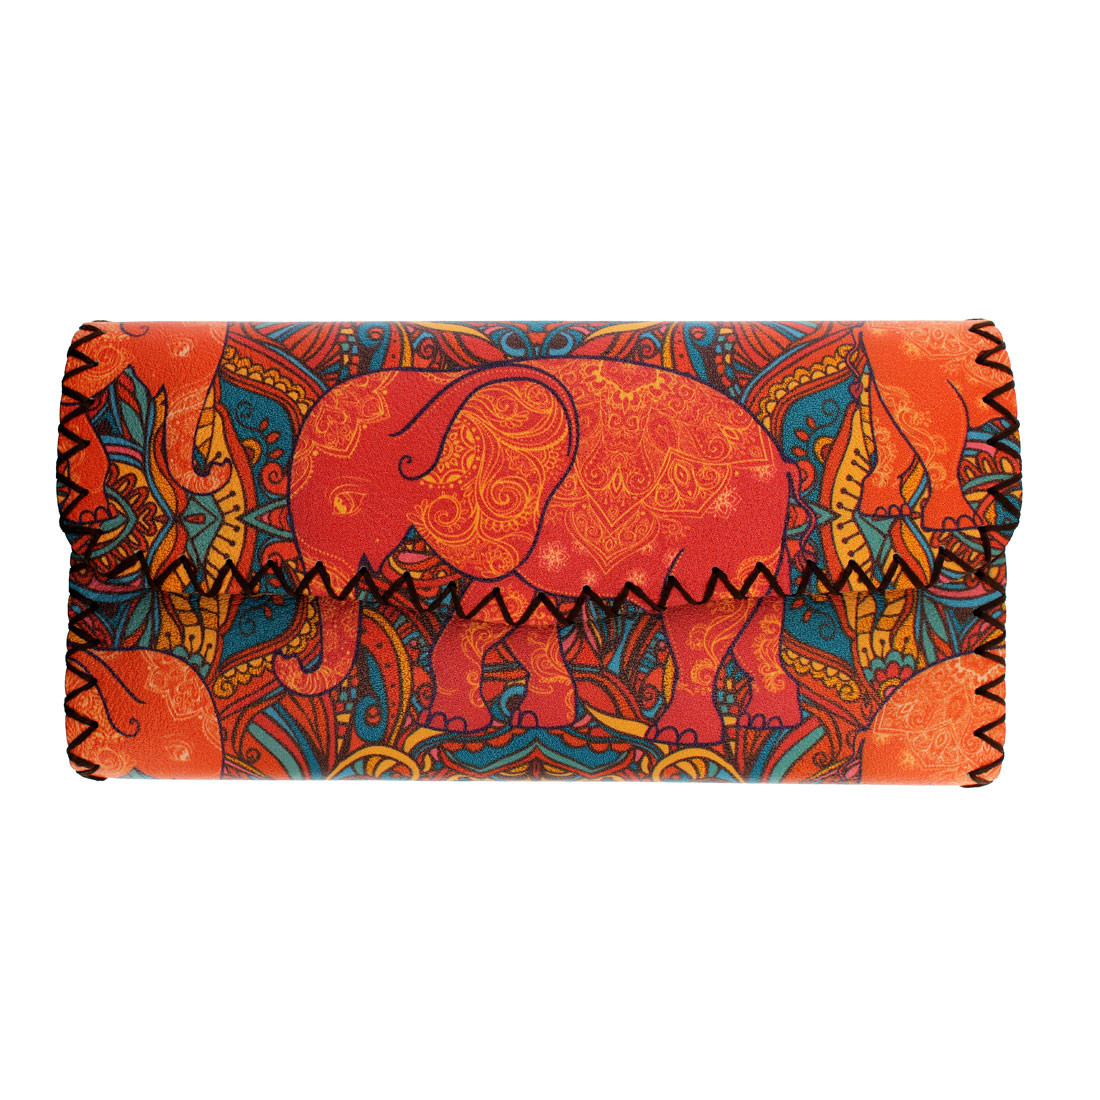 Orange Elephant  with Colorful Bohemian Style Design Wallet 